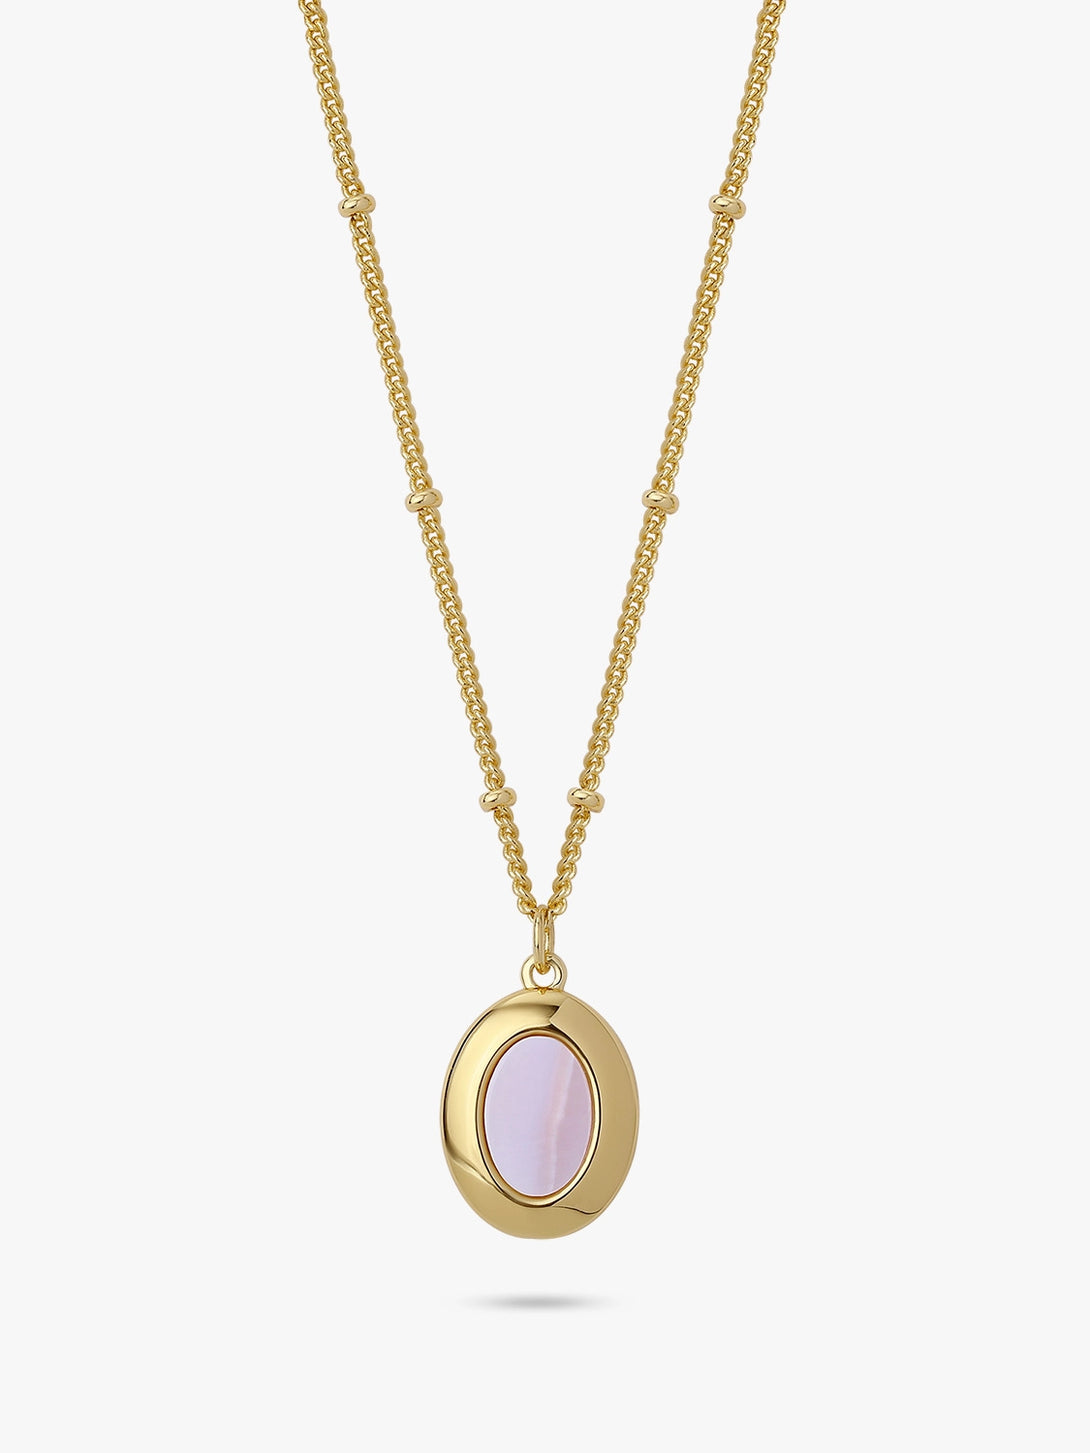 Classical Oval Pendant Necklace - OOTDY